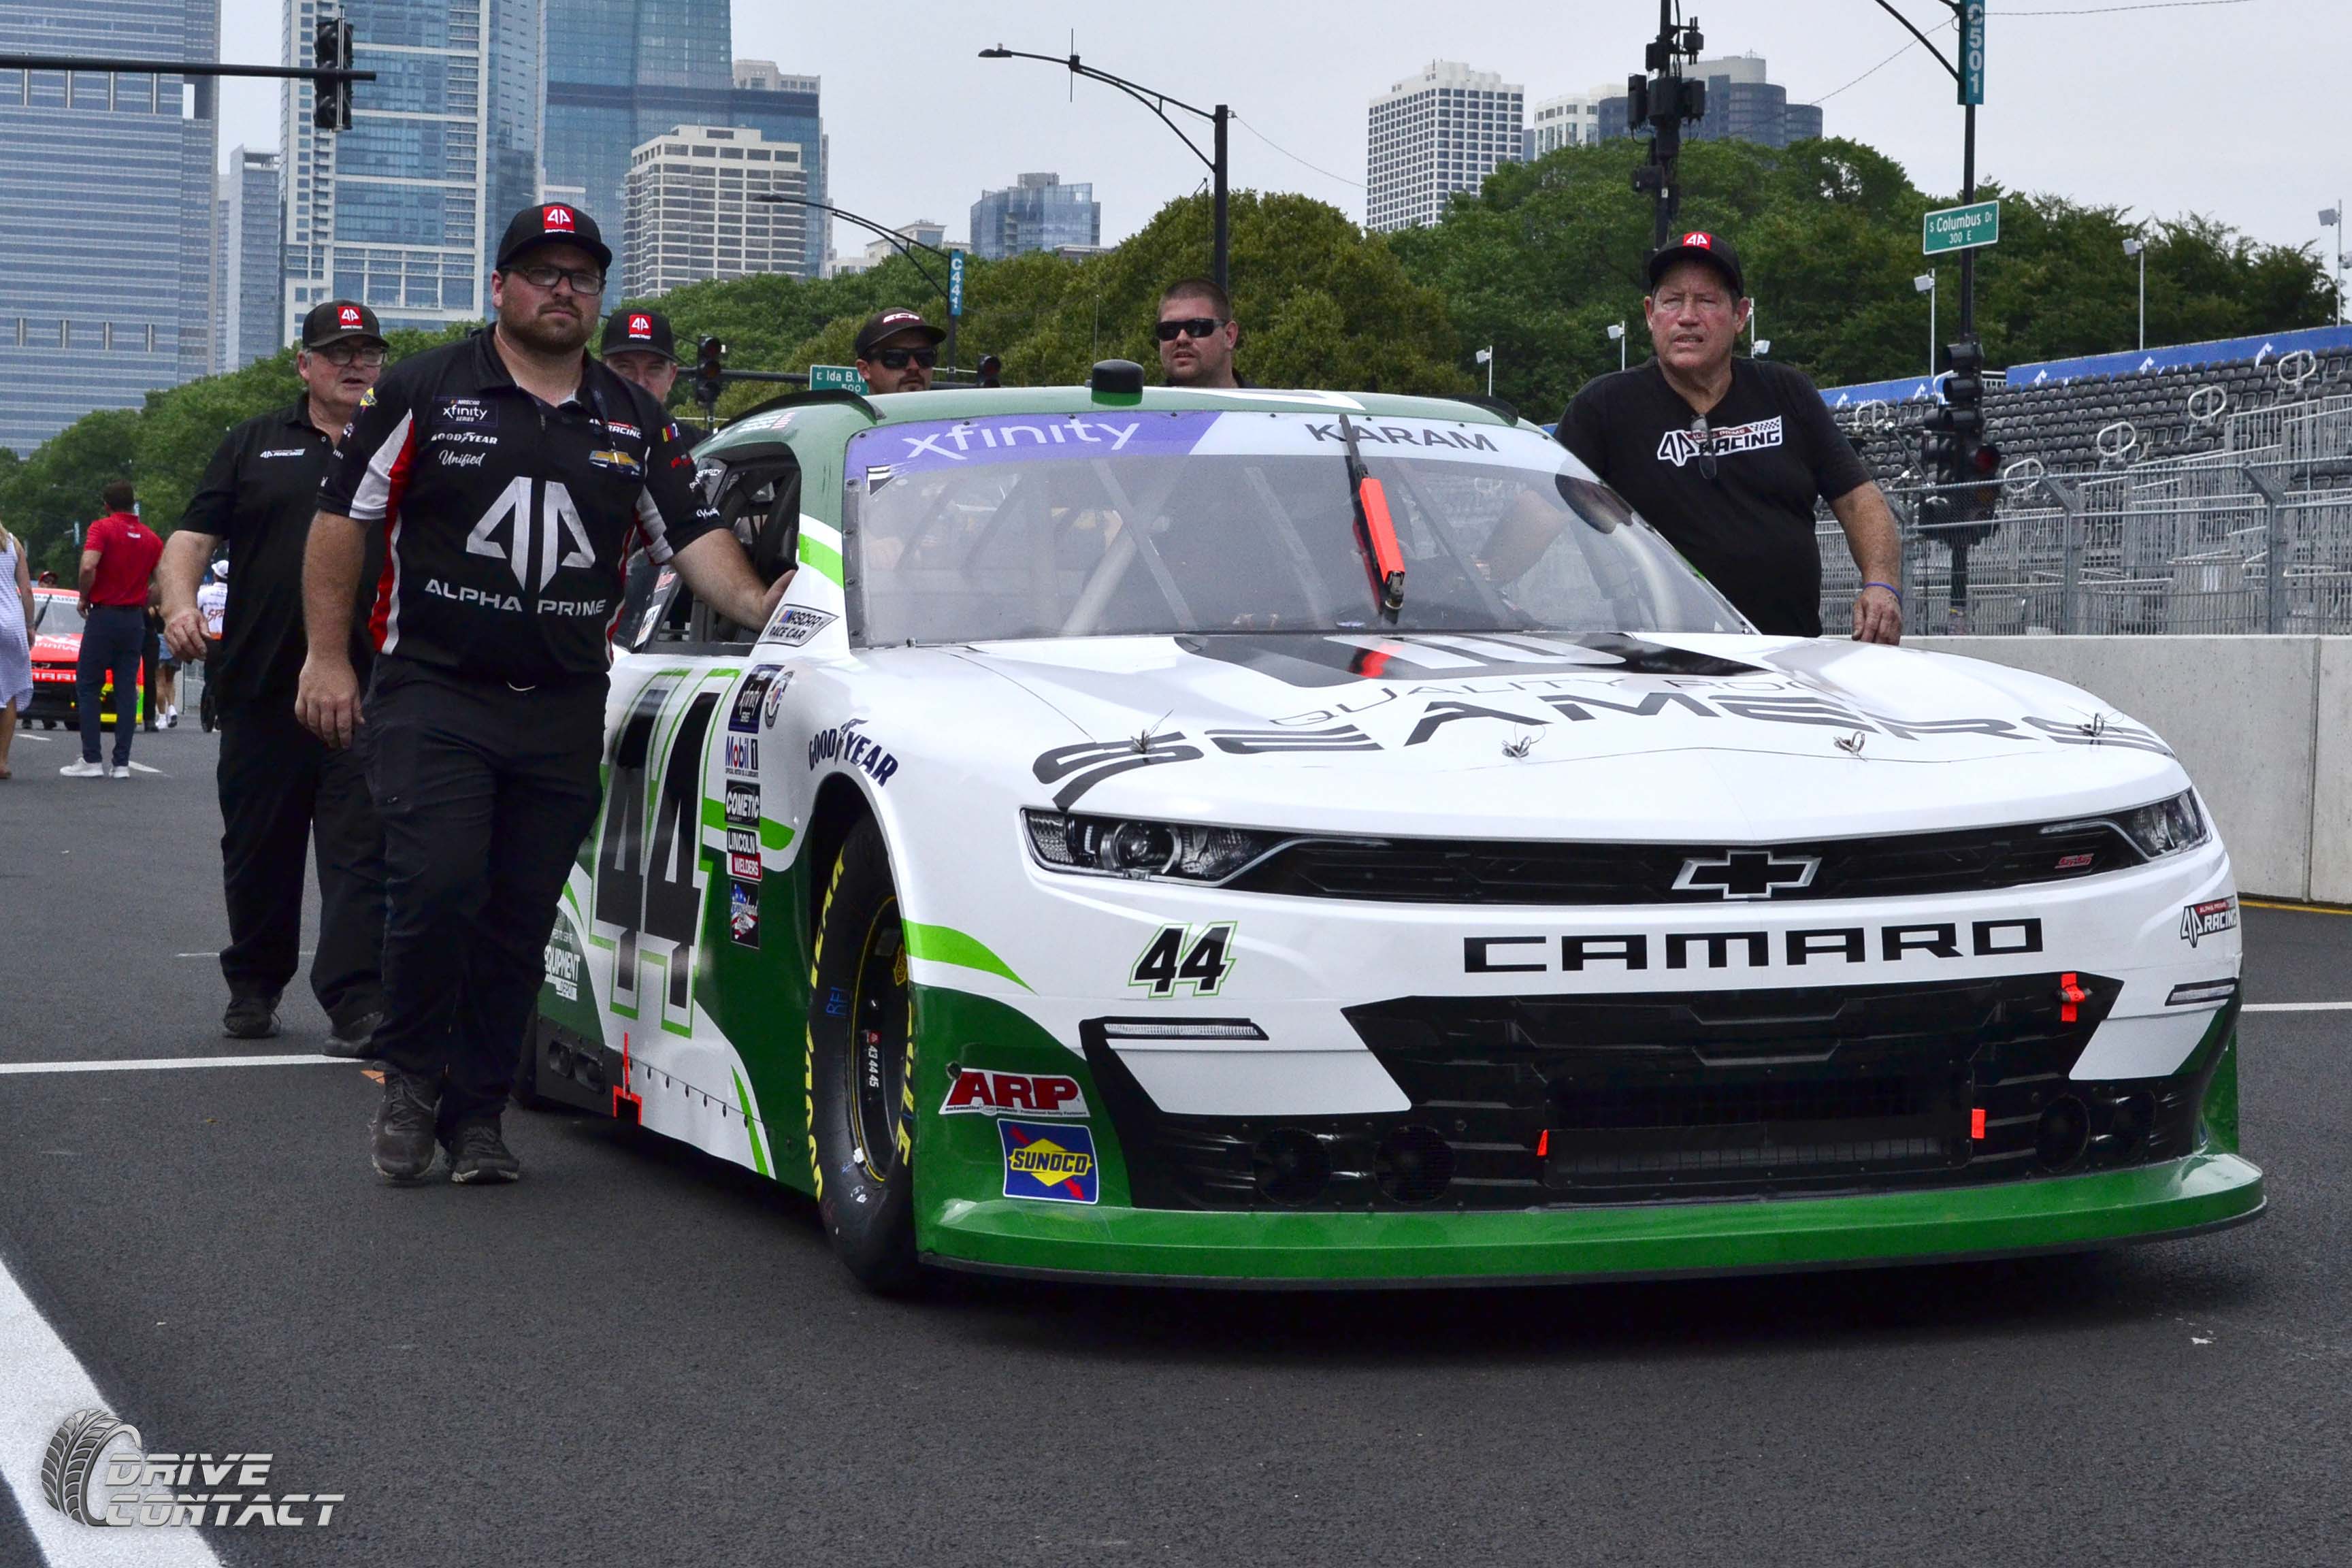 Sage Karam will drive the No. 44 Green Lime Automotive Chevrolet